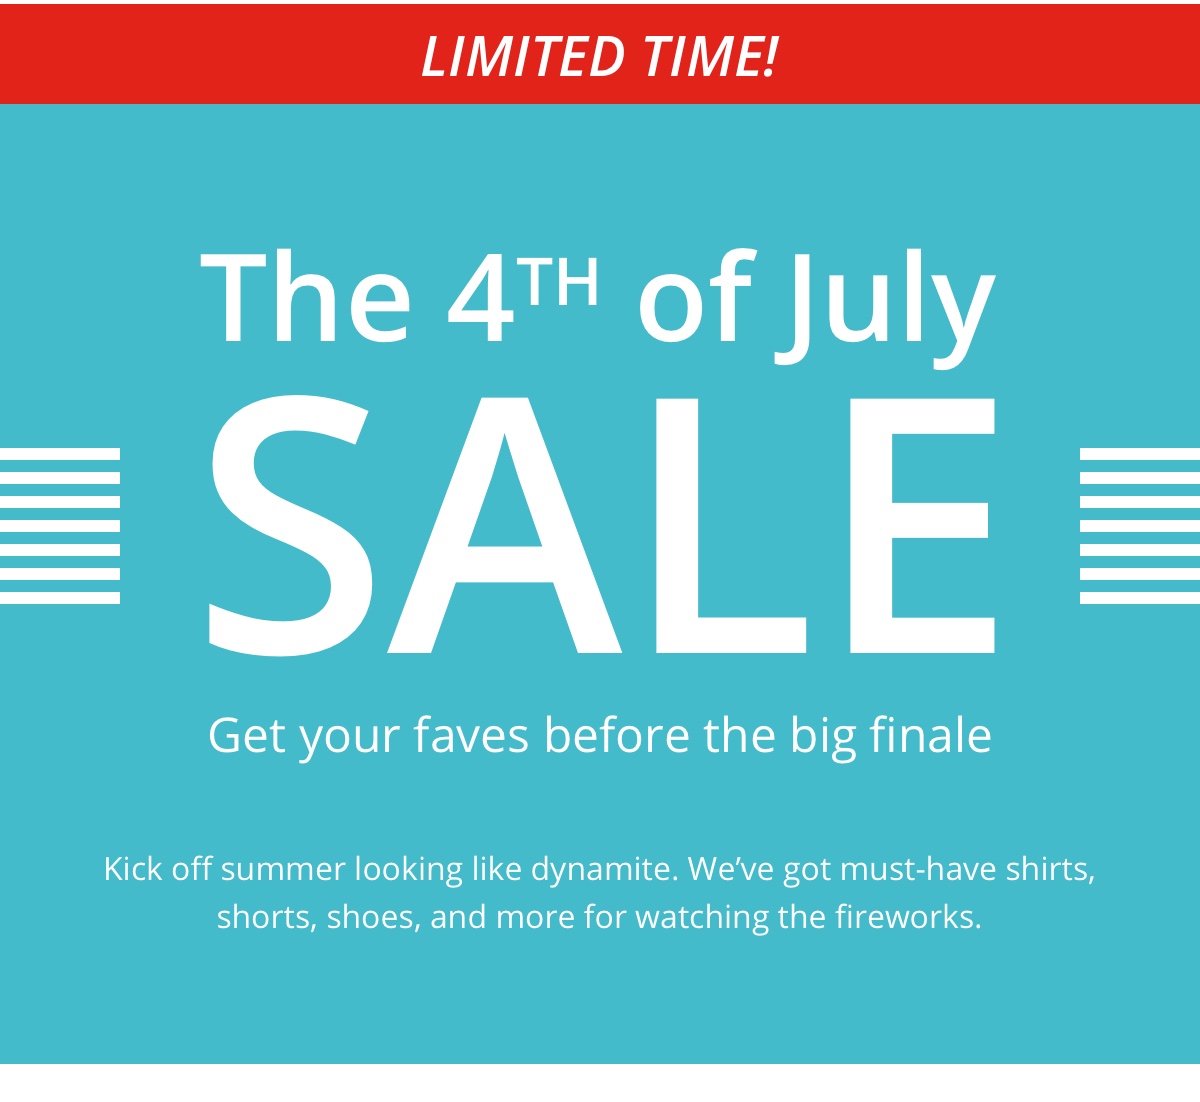 Limited Time!|The 4th of July|Sale|Get your faves before the big finale|Kick off summer looking like dynamite. Weve got must-have shirts,|shorts, shoes, and more for watching the fireworks.